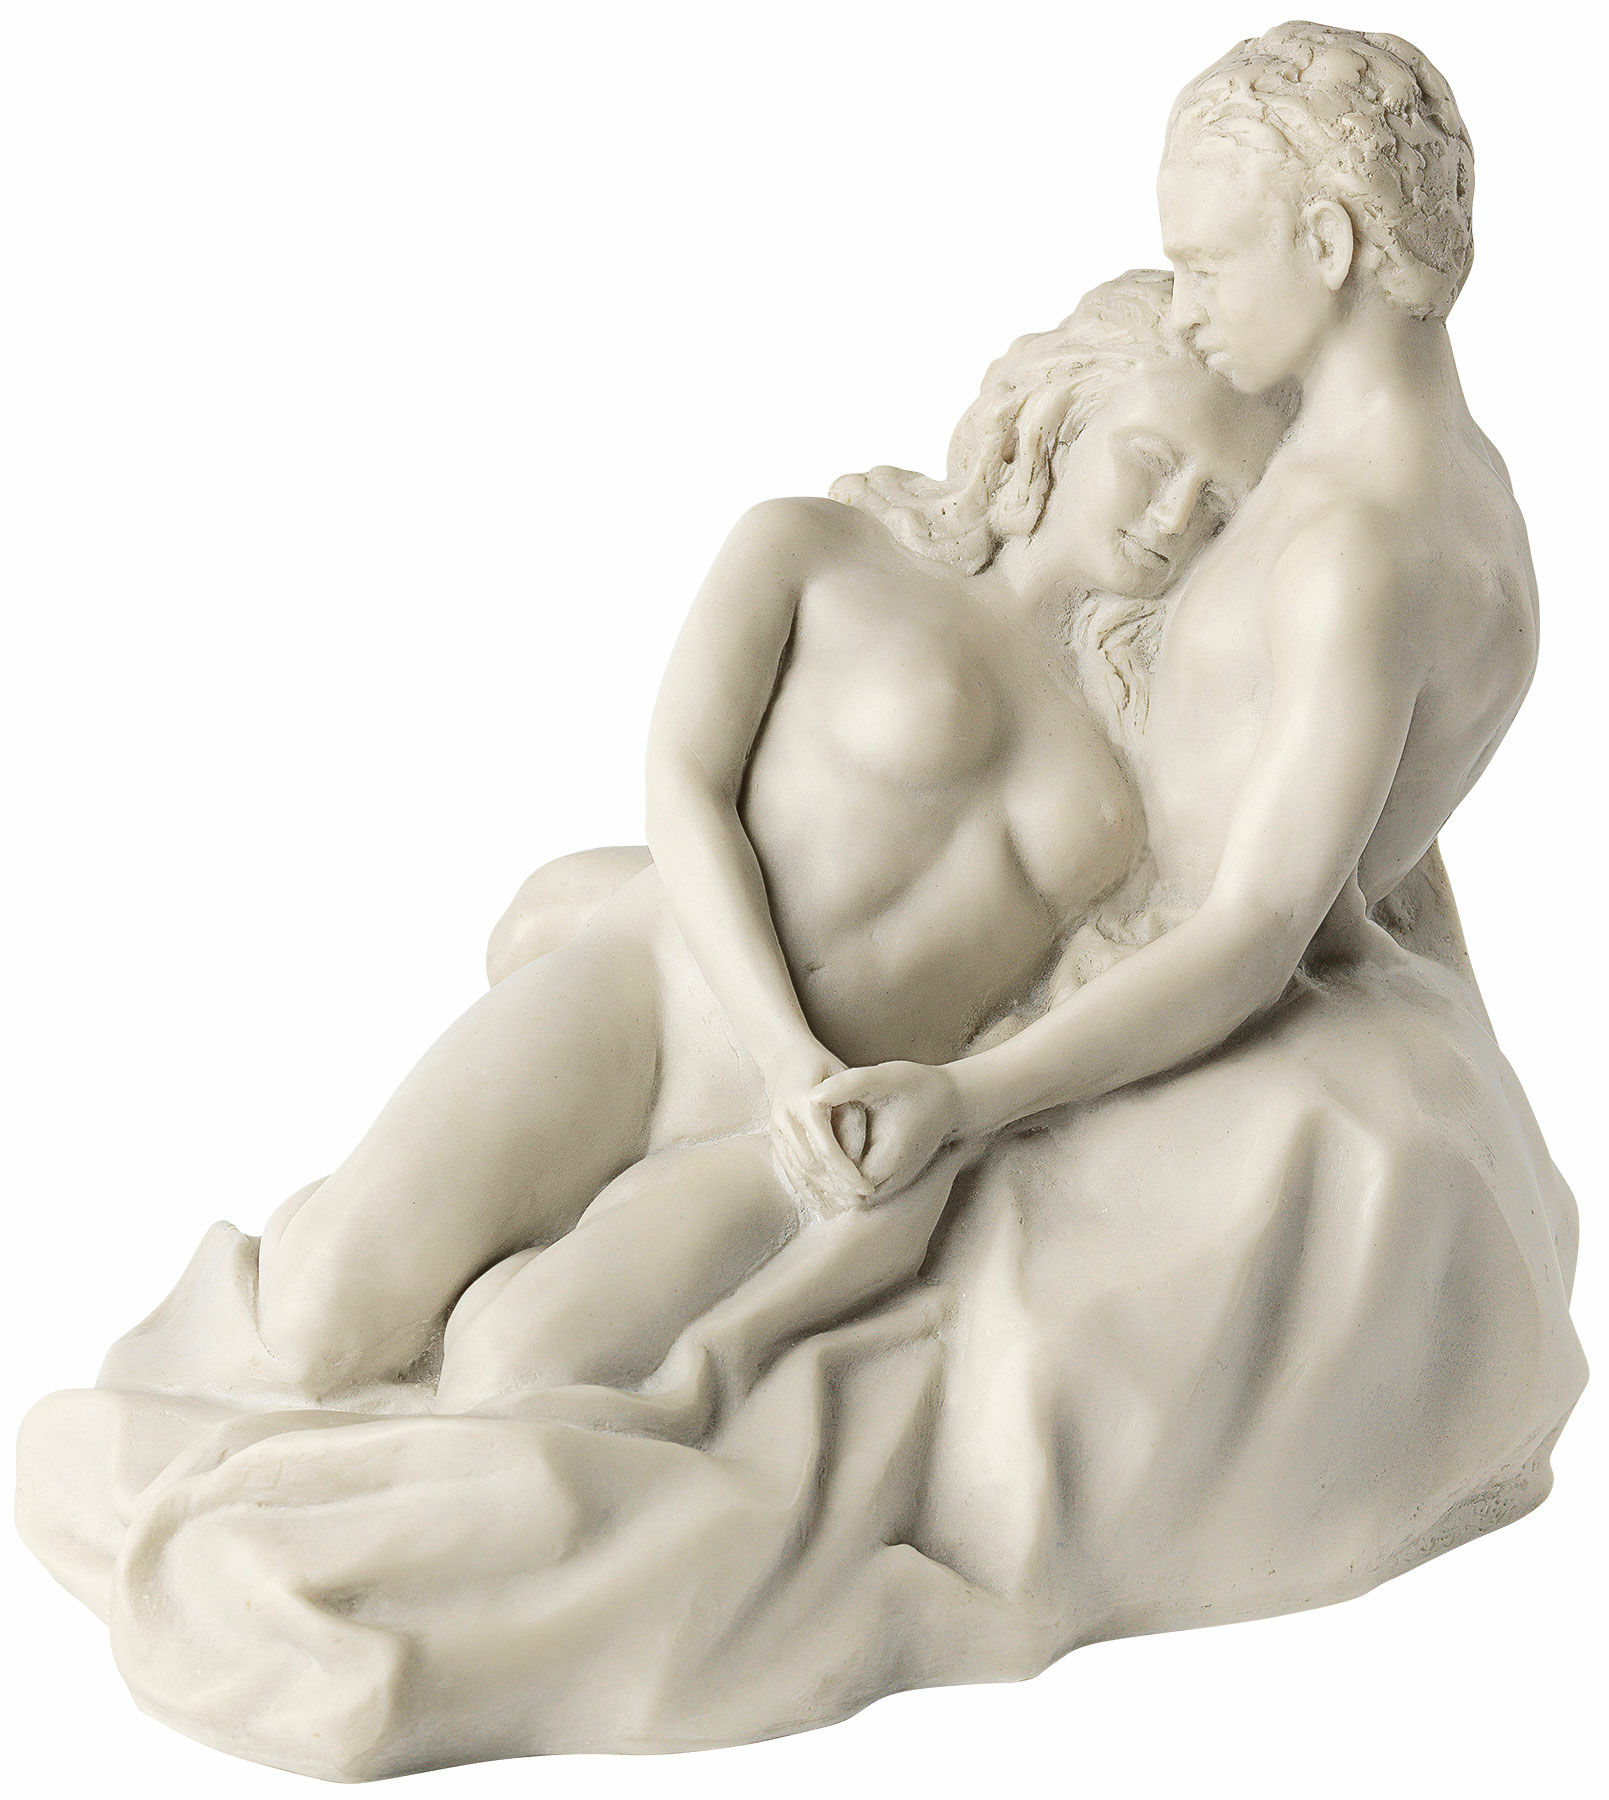 Sculpture "Lovers" (2017), artifical marble version by Kay